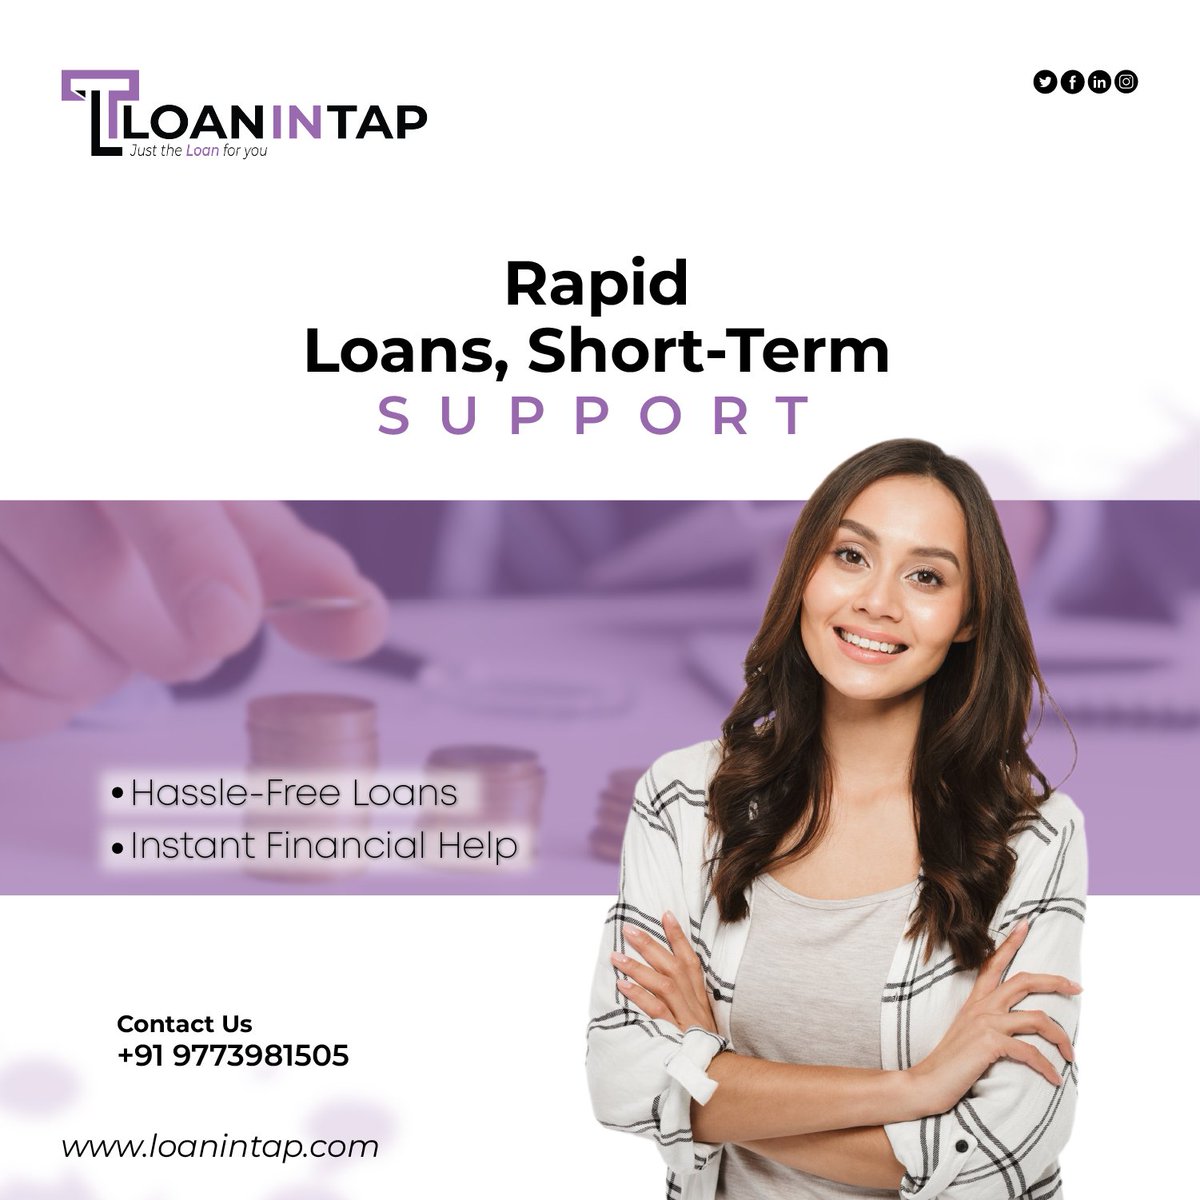 Our streamlined process ensures quick access to funds when time is of the essence. 

#shorttermloans #instantloan #loan #loanprovider #loanservices #emiloan #business #money #finance #shorttermbusiness #buinessloan #instantbusinesloan #onlineloan #onlinebusinessloan #loanservice